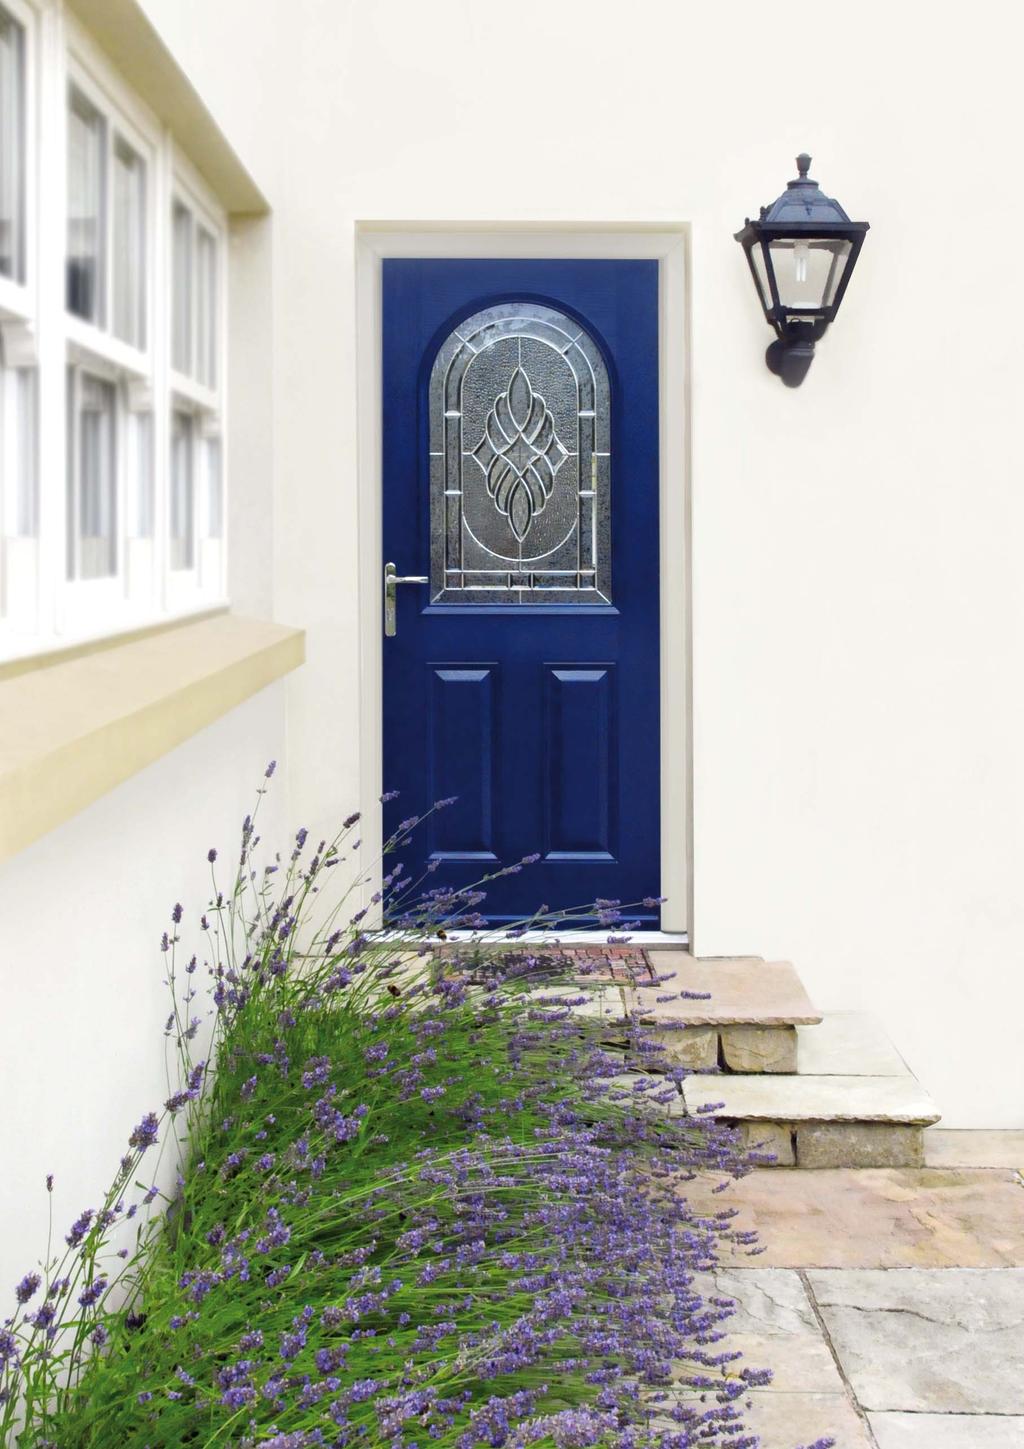 Welcome Enhance your home with strong, secure and stylish Inliten Composite Door.